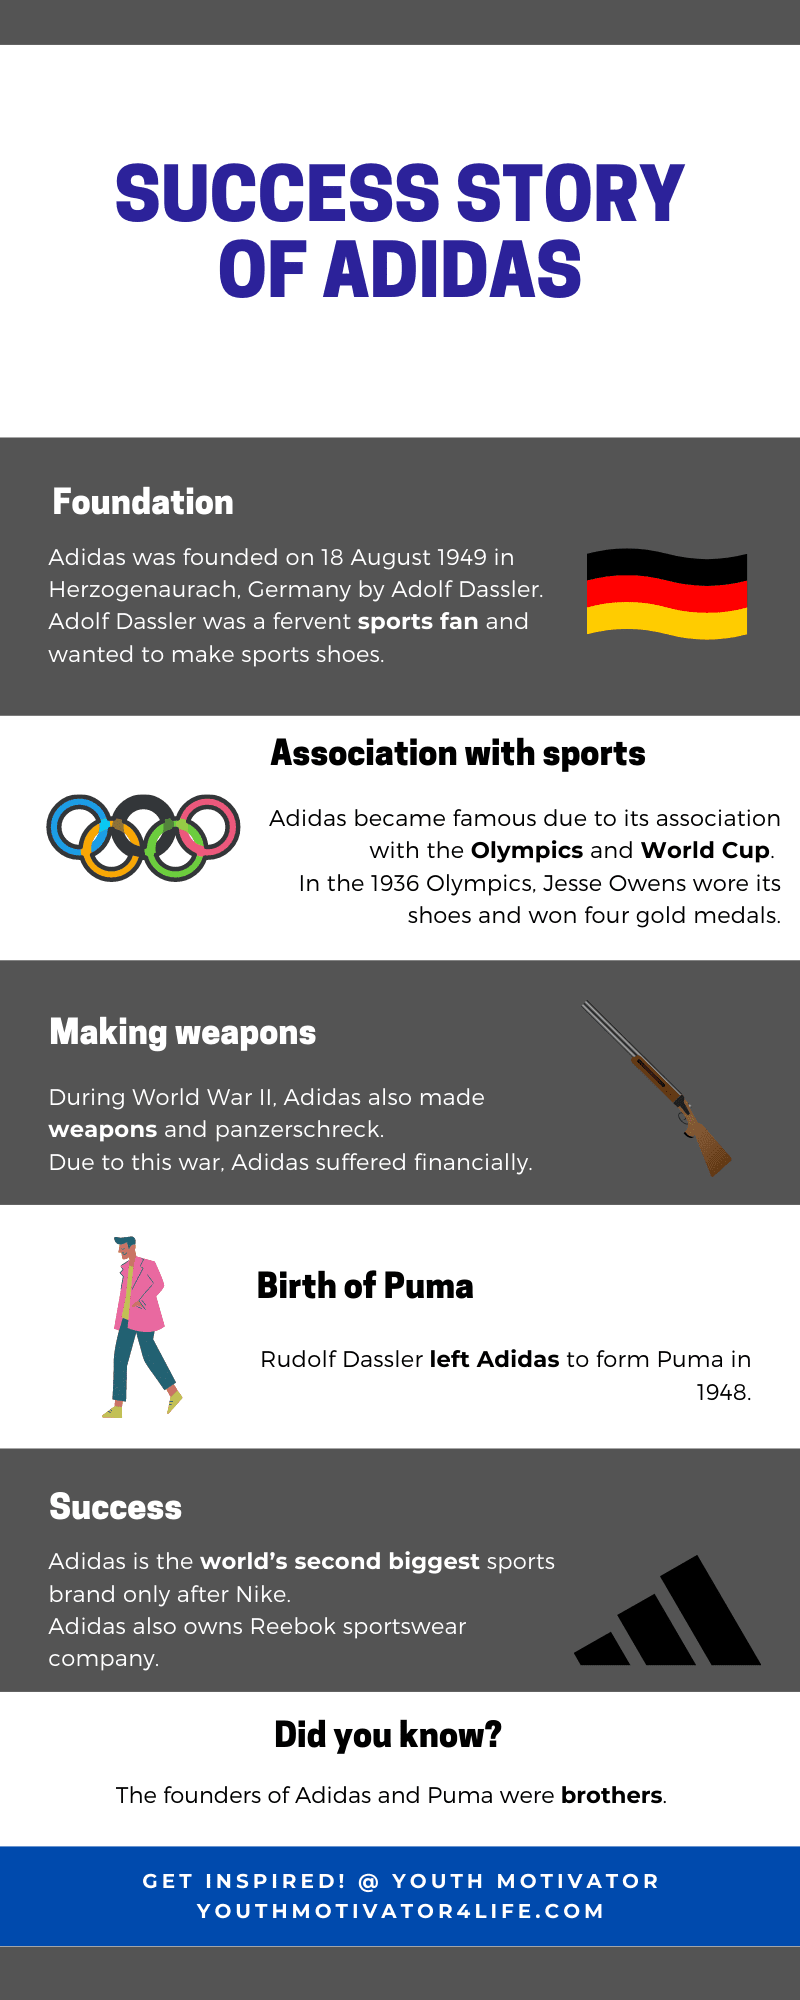 An infographic on success story of Adidas